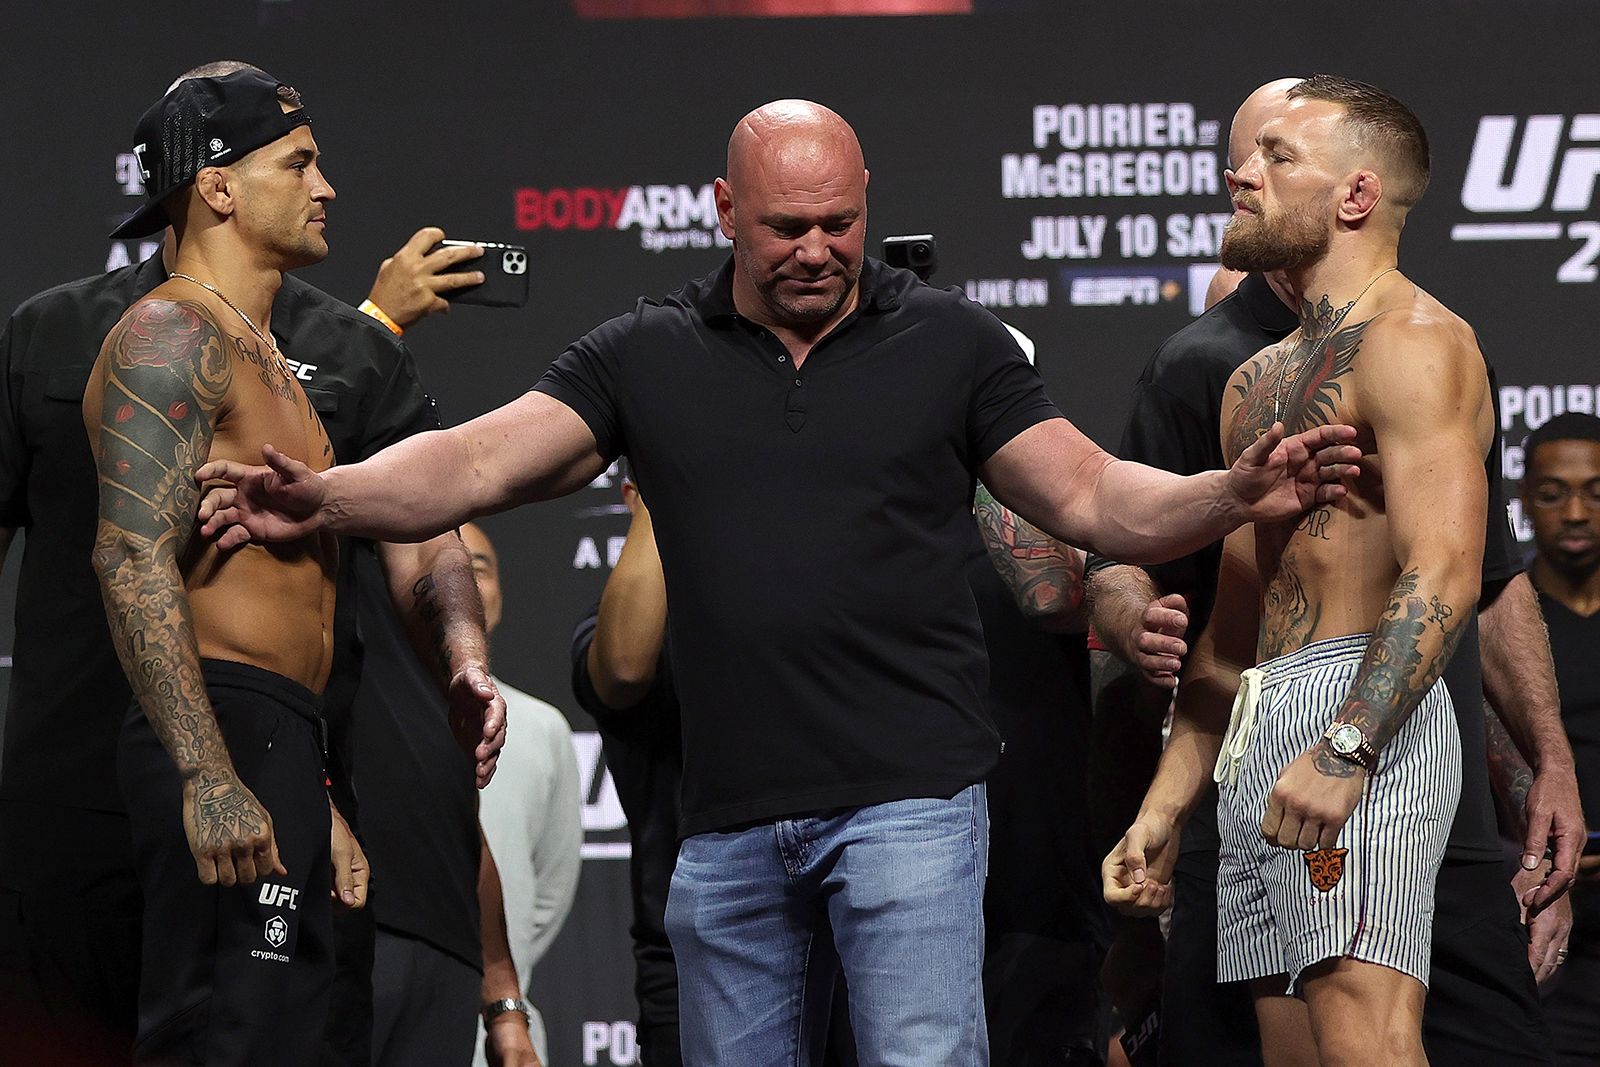 Dustin Poirier beats Conor McGregor with a TKO in UFC 264 after